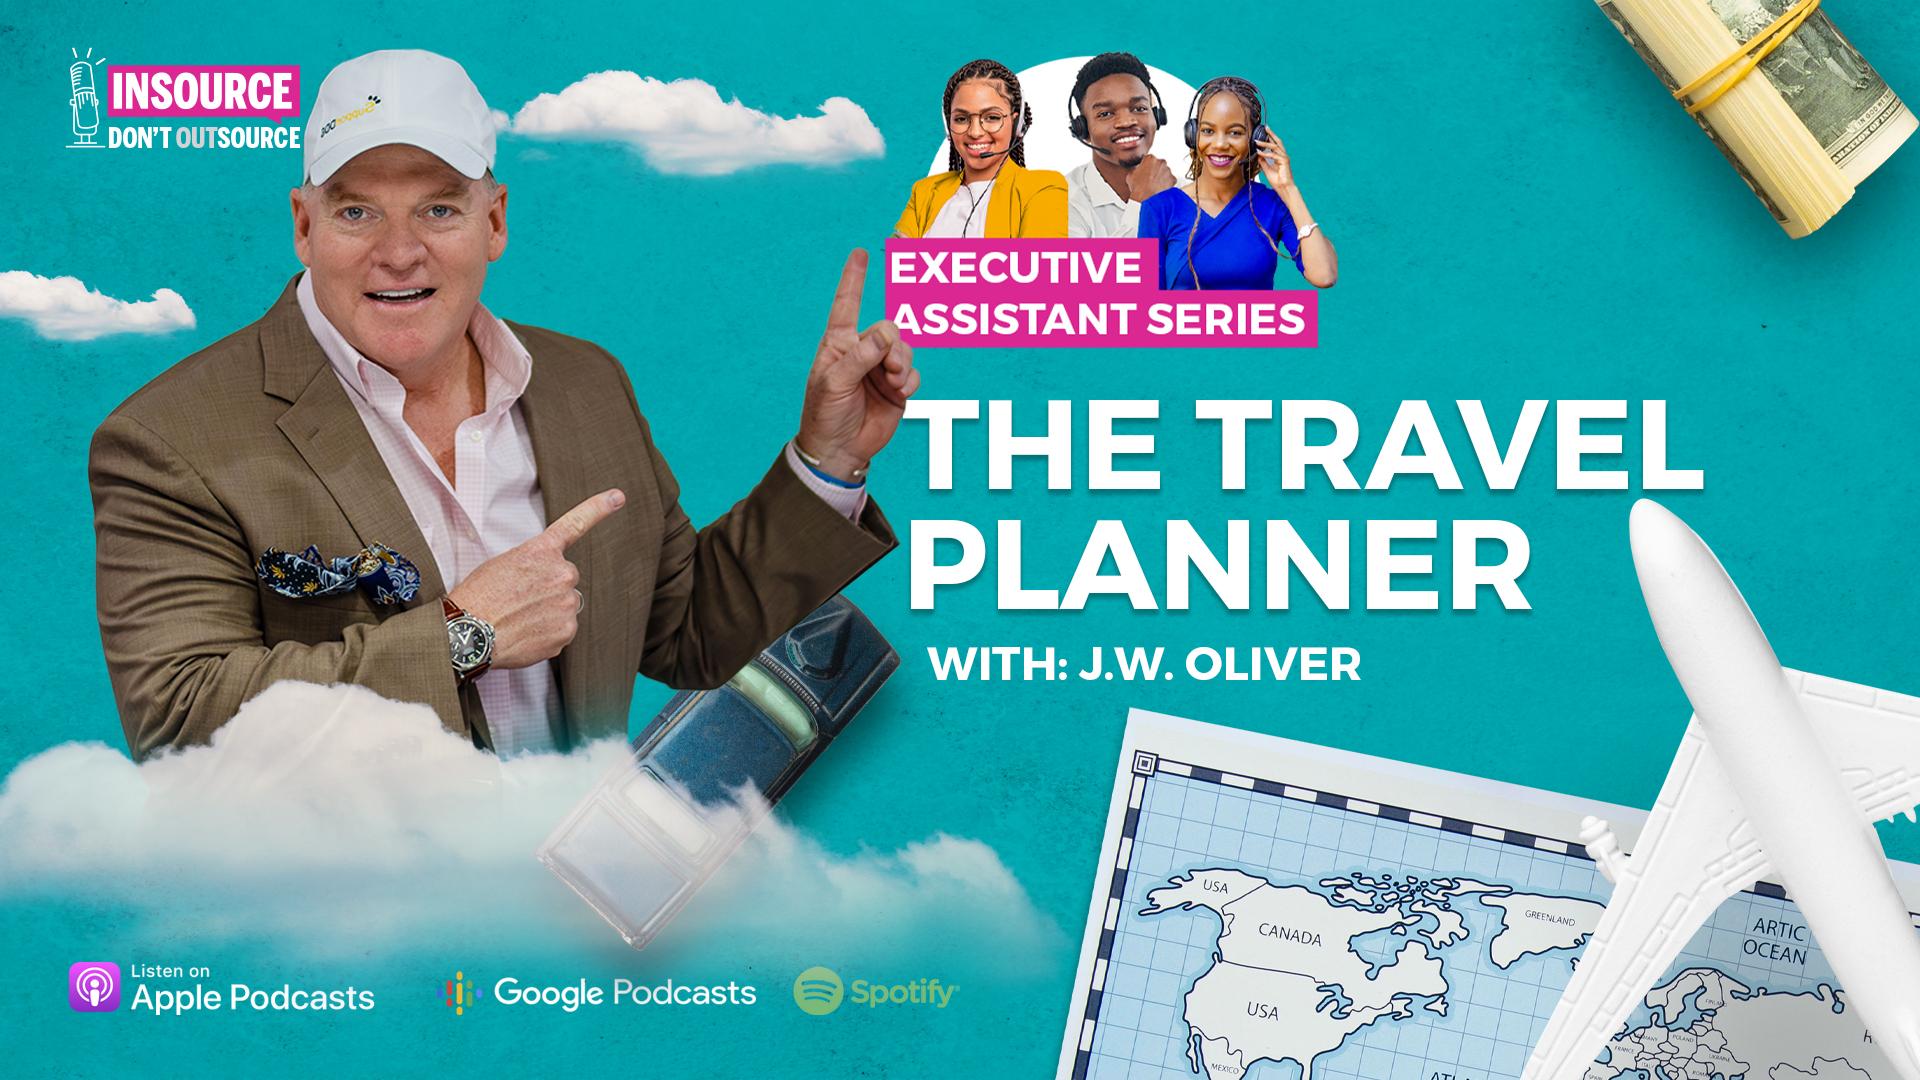 Episode 37 | Executive Assistant Series - The Travel Planner